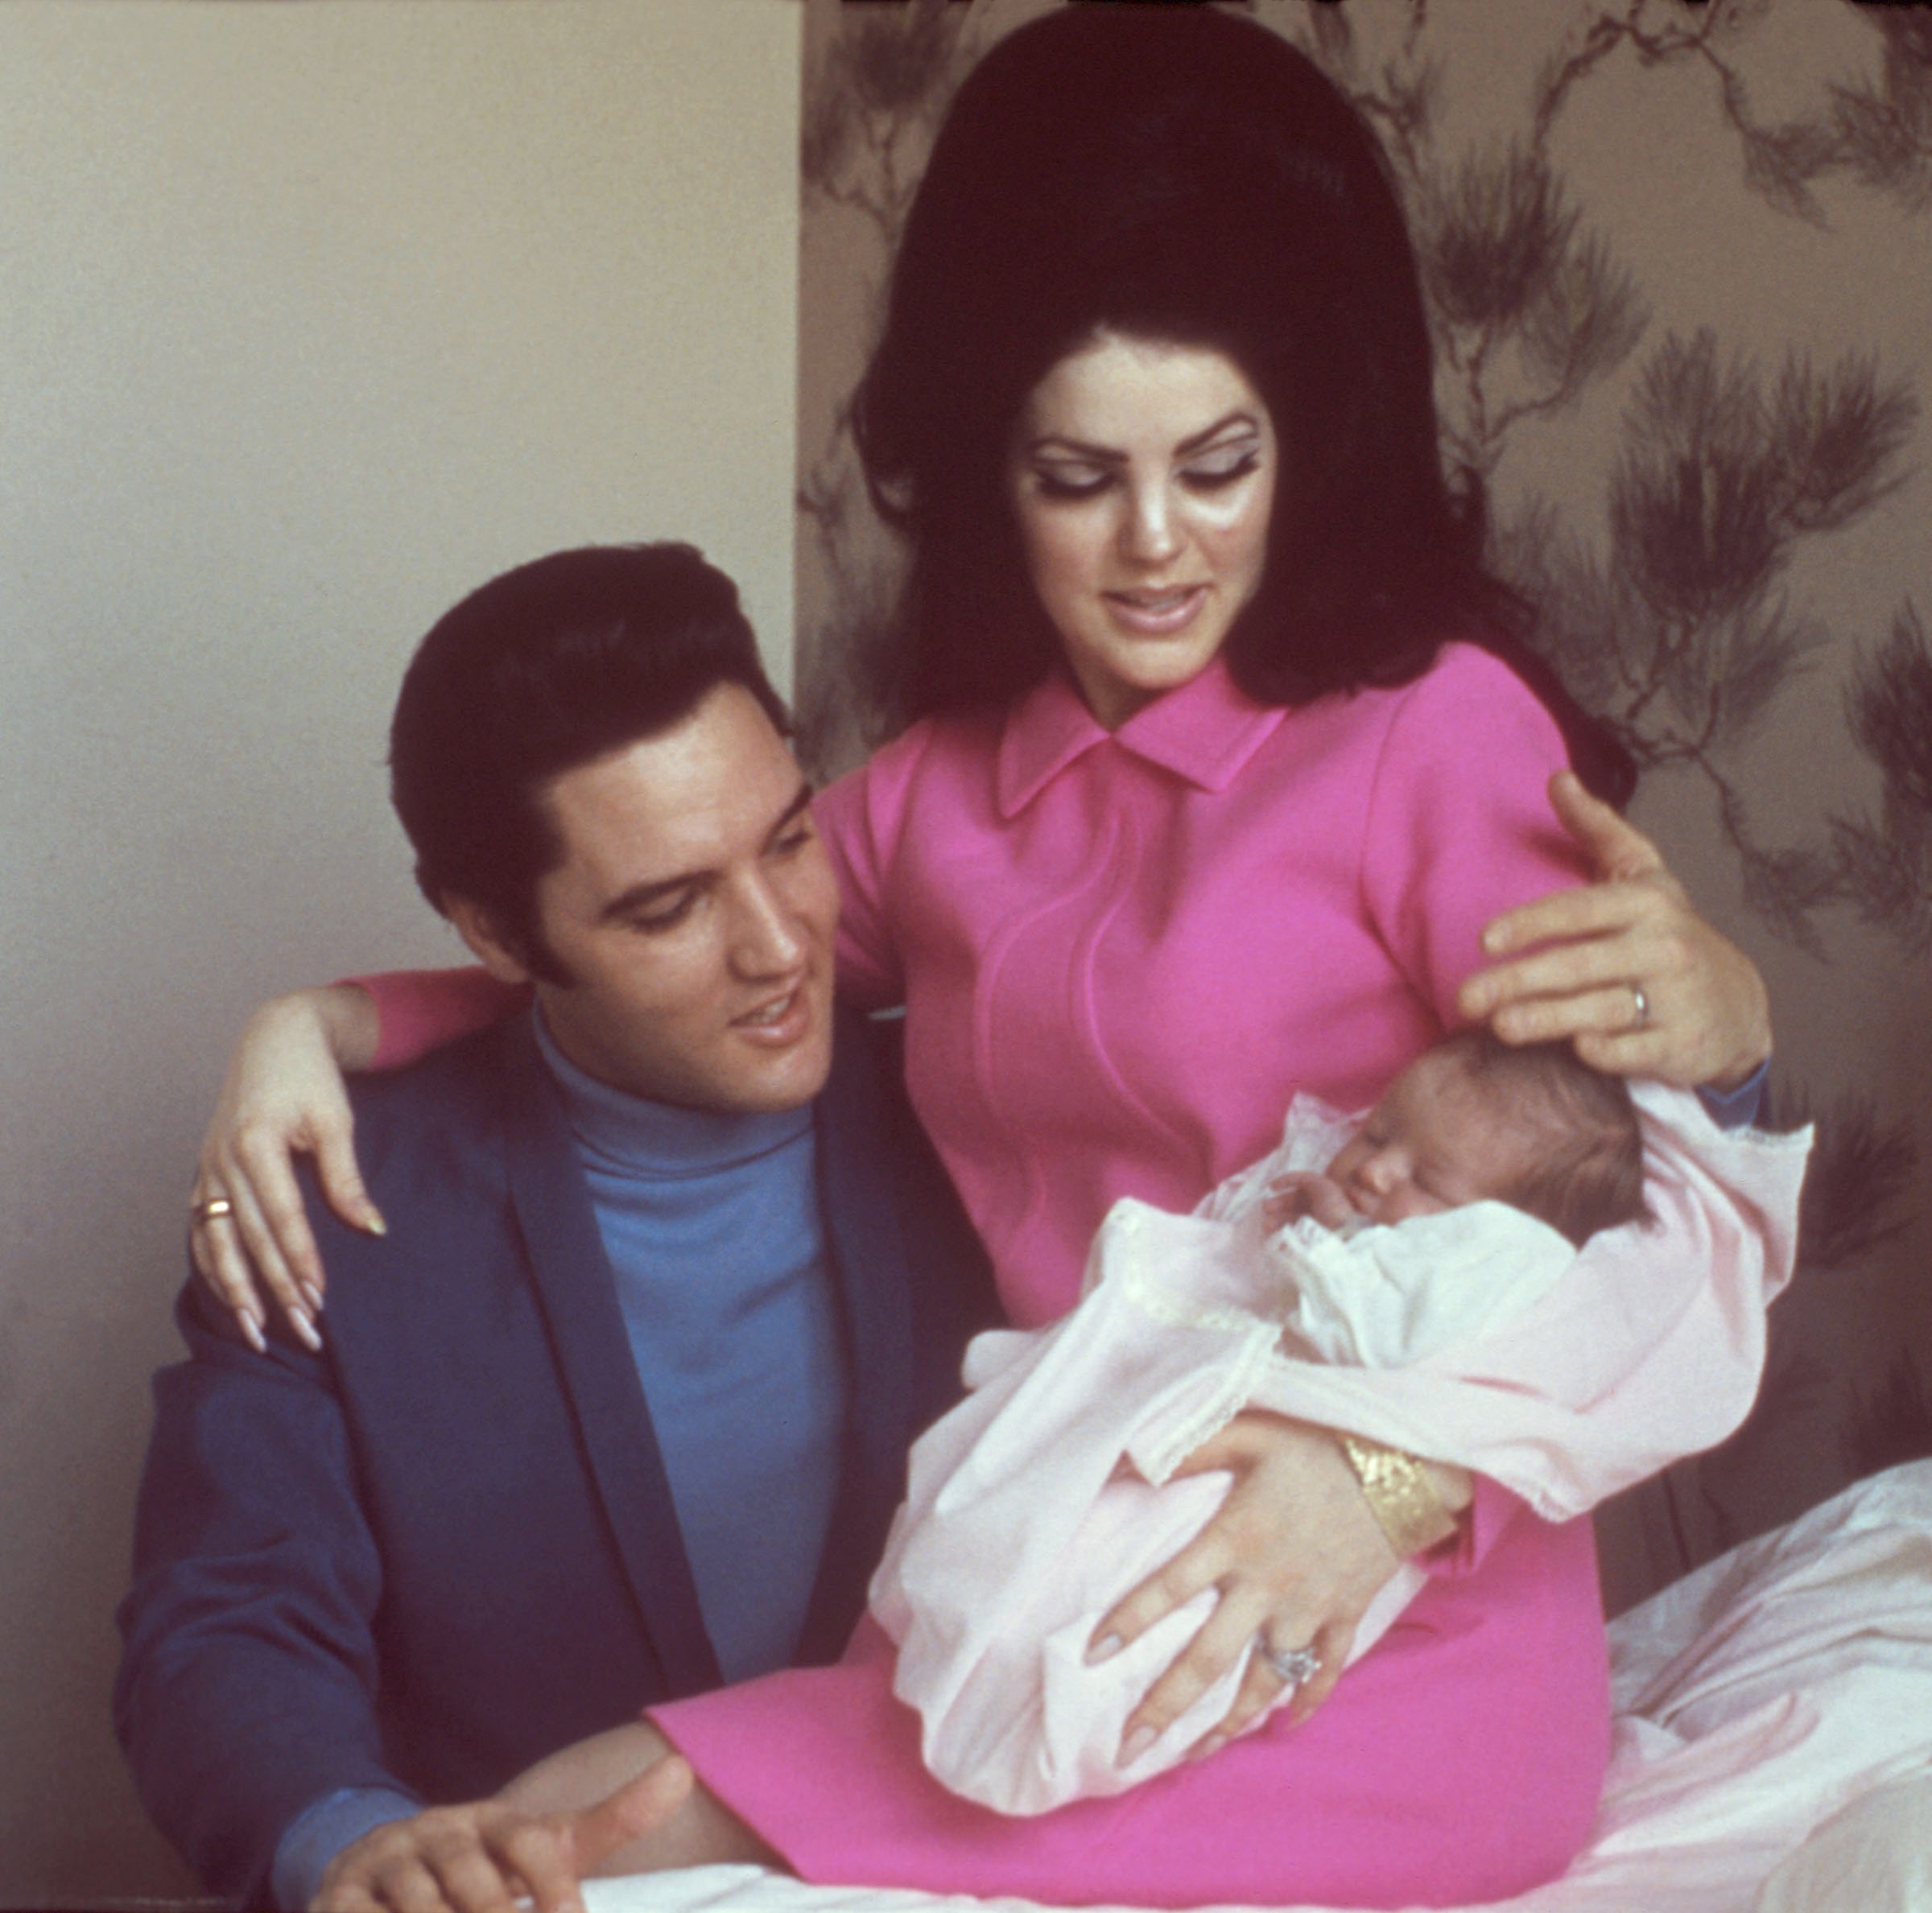 Elvis Presley, Priscilla Beaulieu Presley, and Lisa Marie Presley on February 5, 1968 in Memphis, Tennessee. | Source: Getty Images